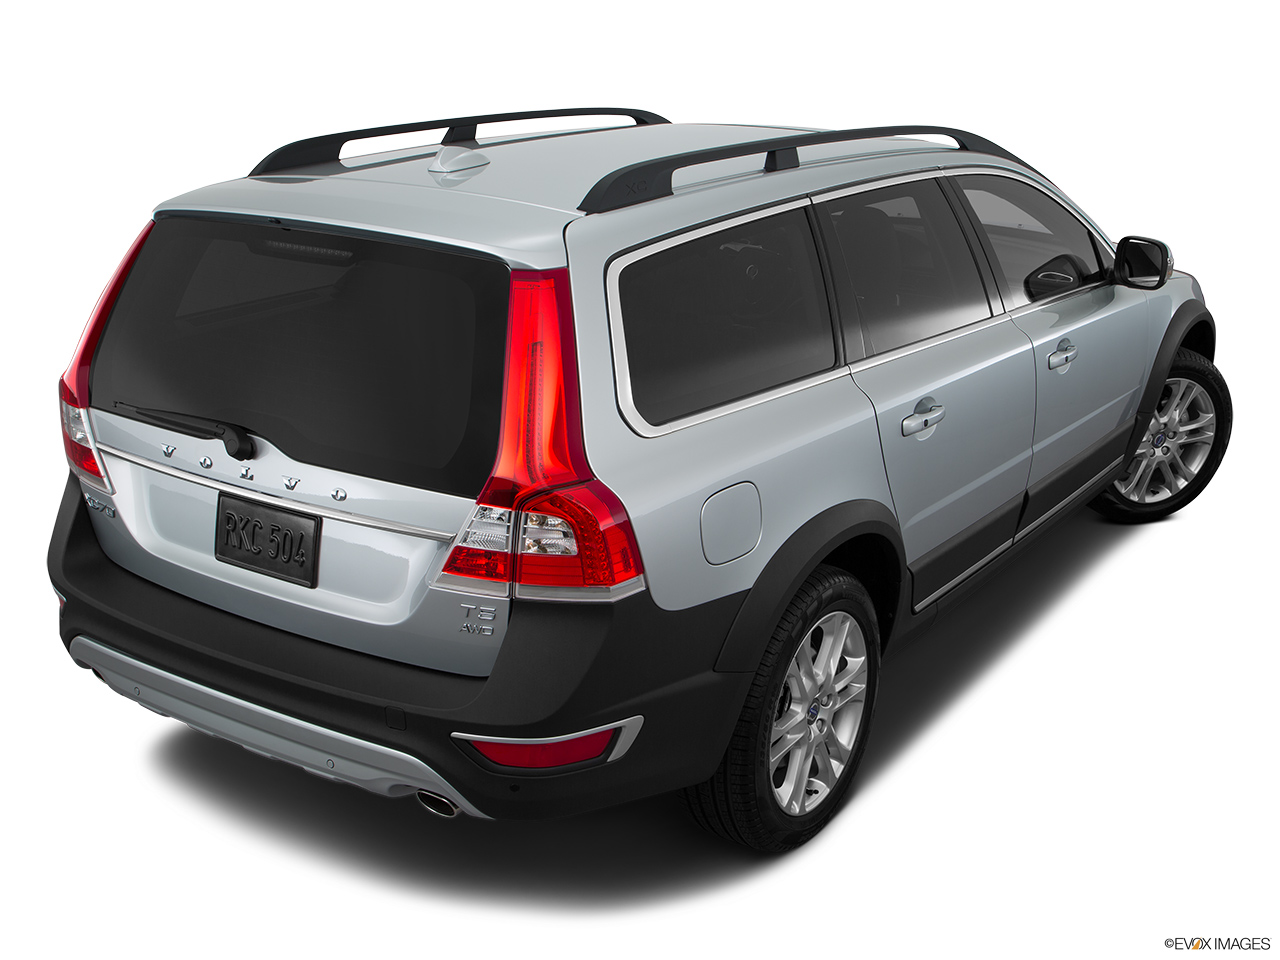 2016 Volvo XC70 T5 AWD Premier Rear 3/4 angle view. 